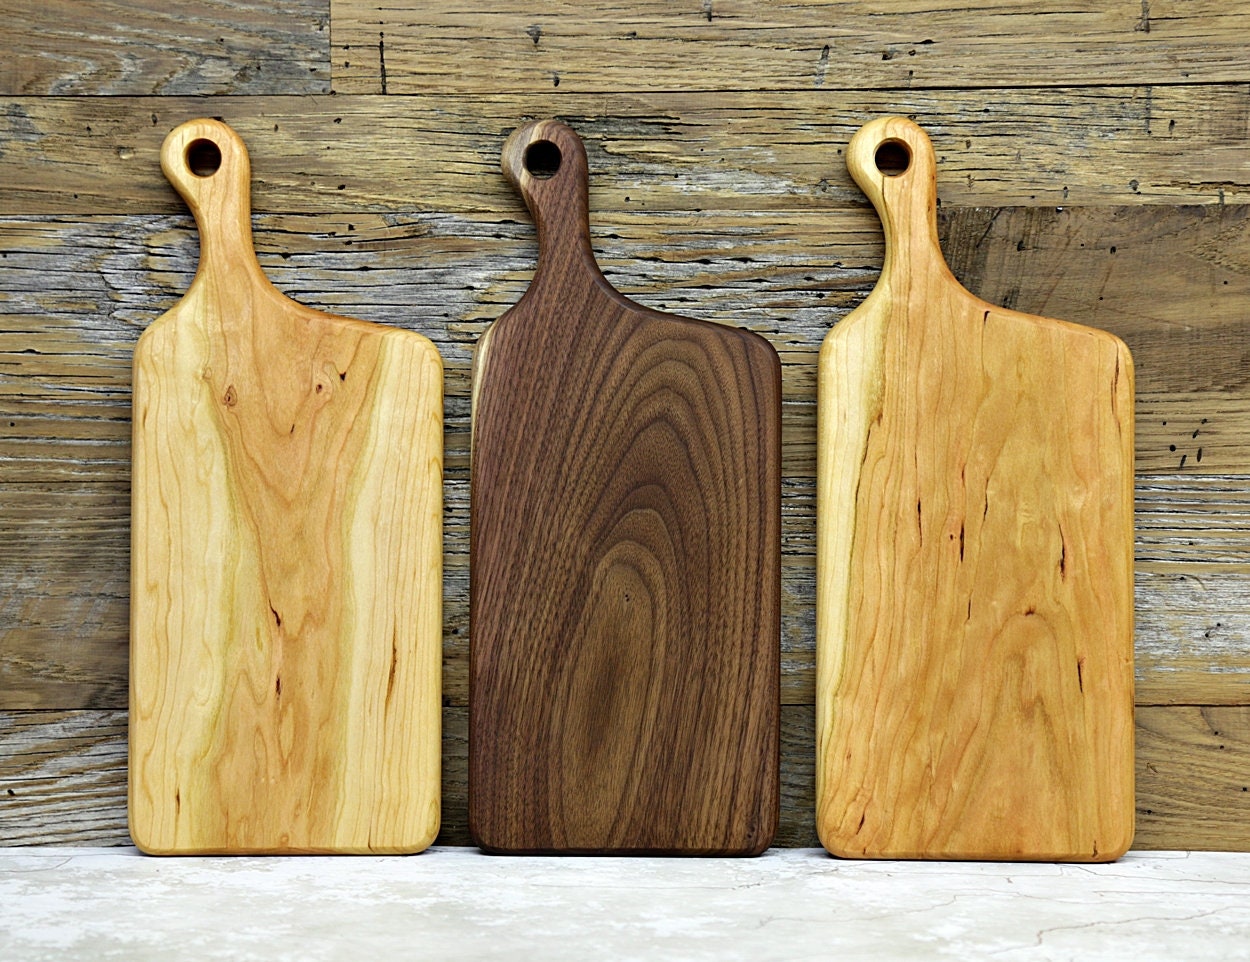 Woodworking Cutting Board Hand Tools